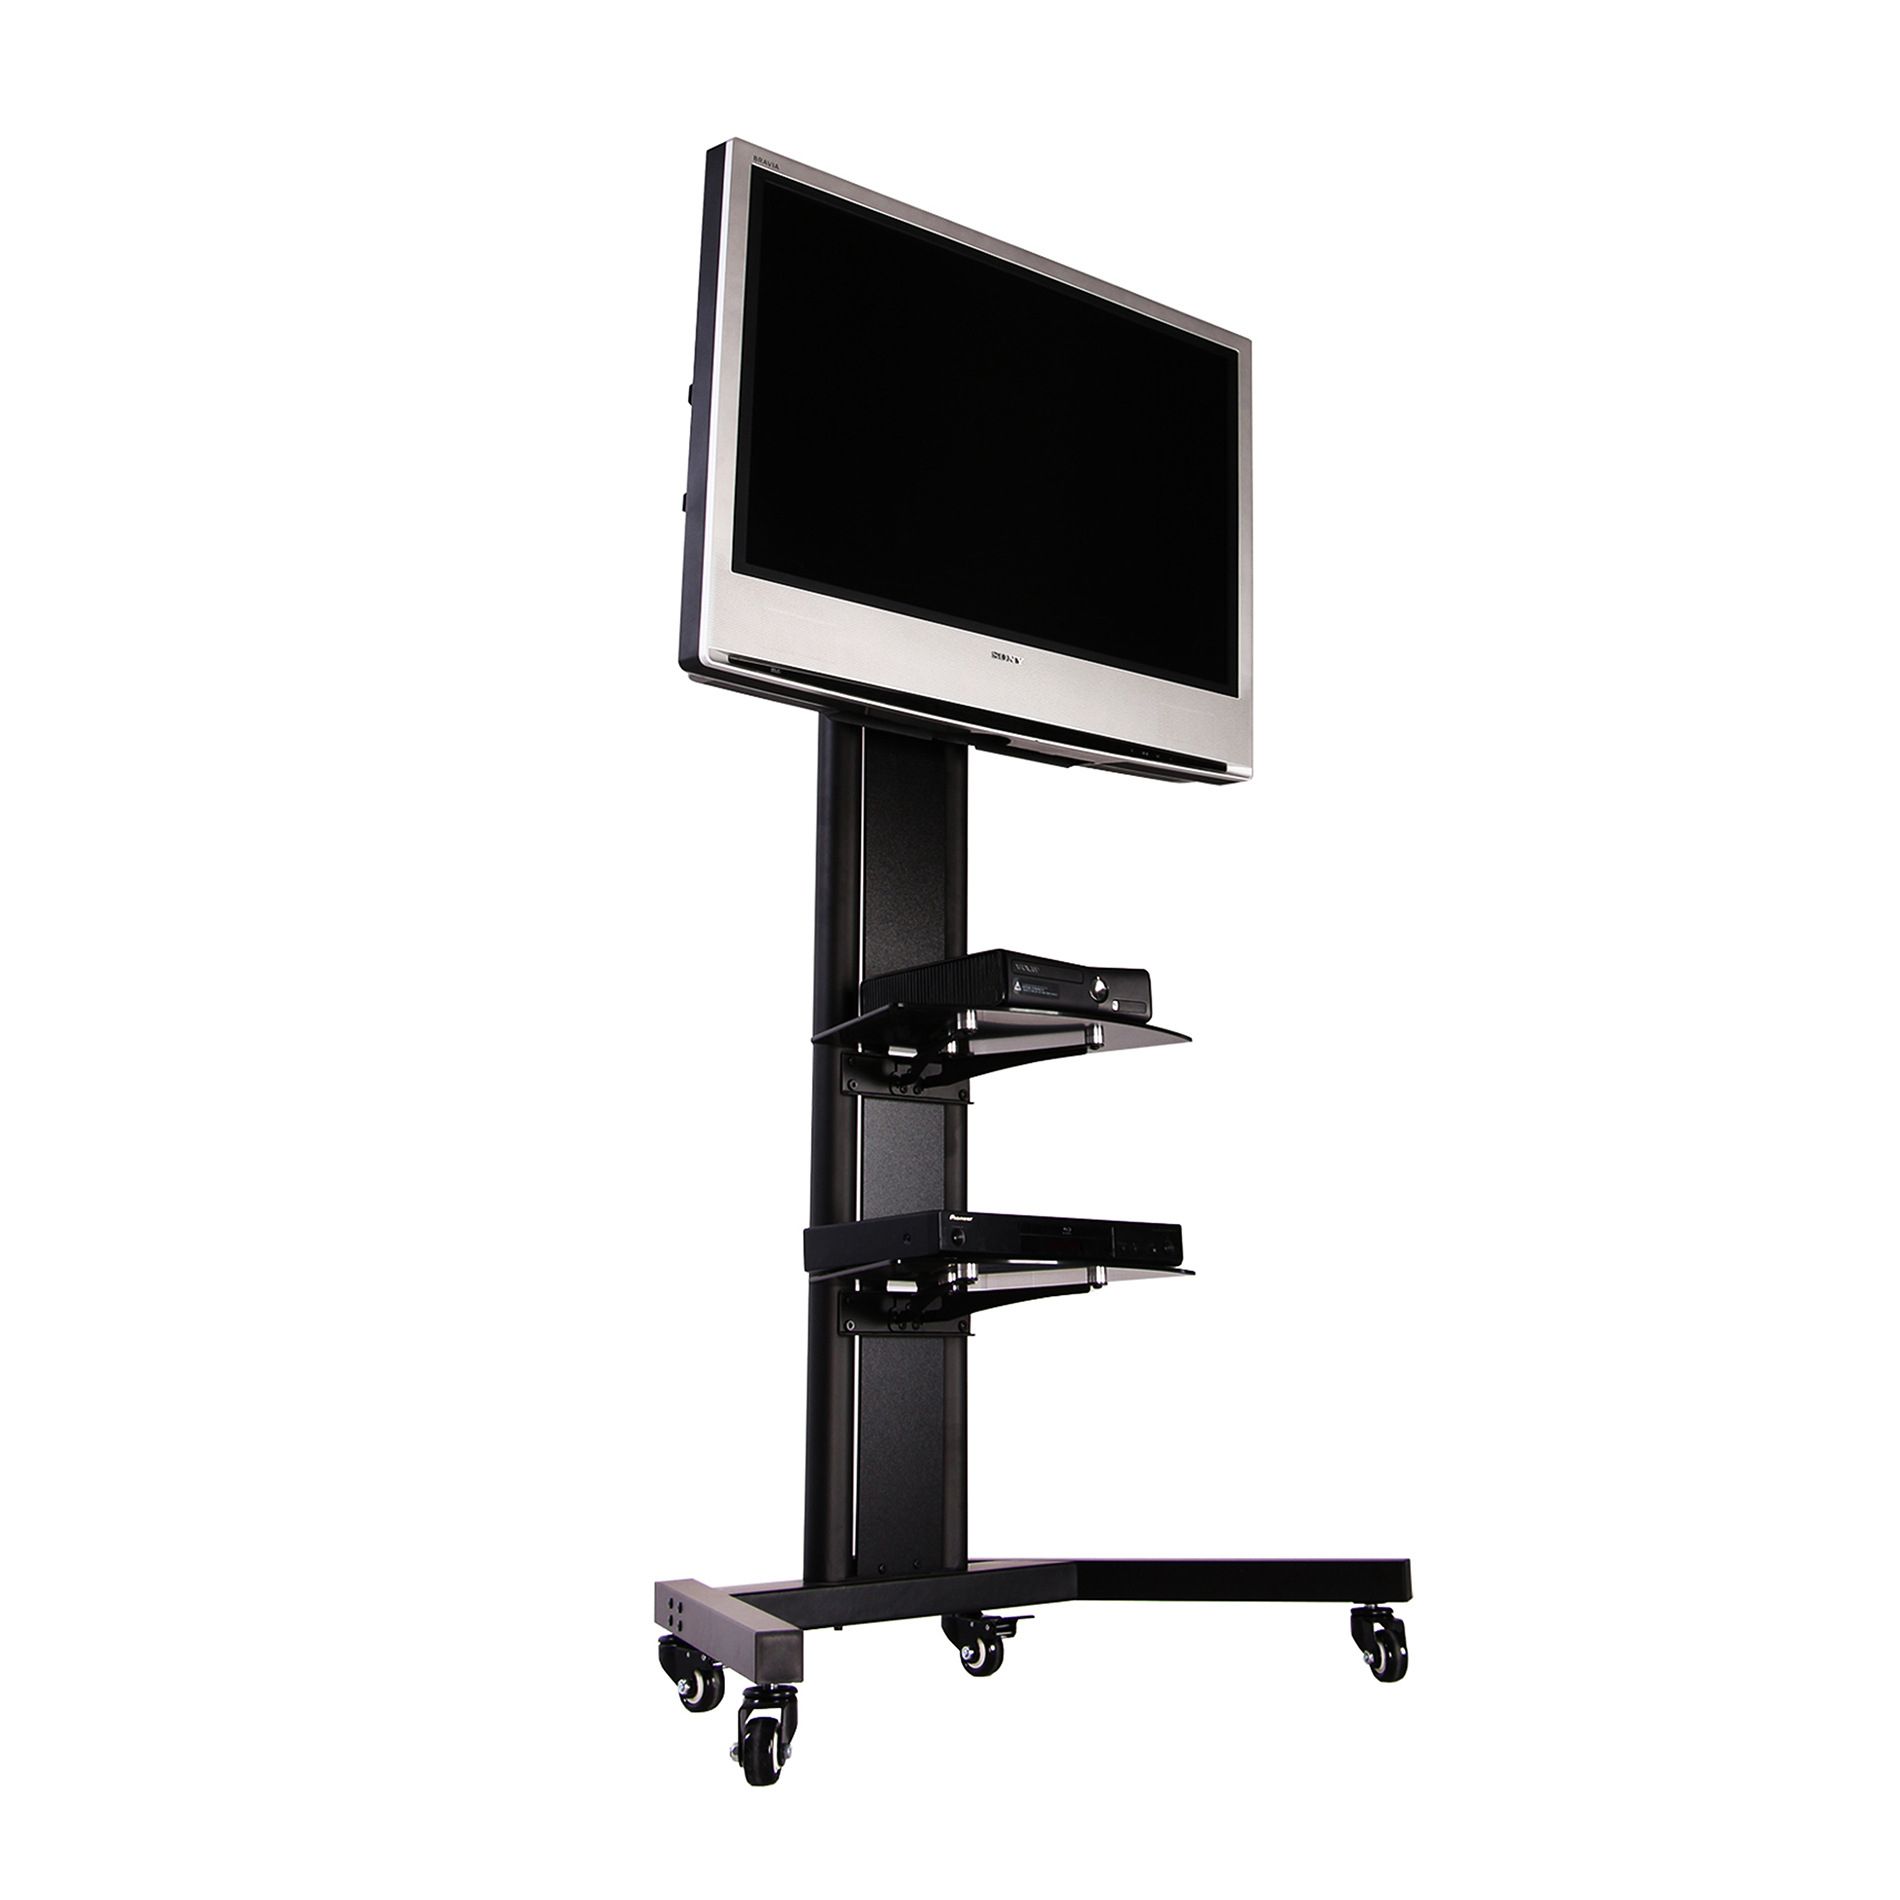 Fitueyes Black Tv Cart Mobile Tv Stand For 32 To 65 Inch Regarding Small Tv Stands On Wheels (View 9 of 15)